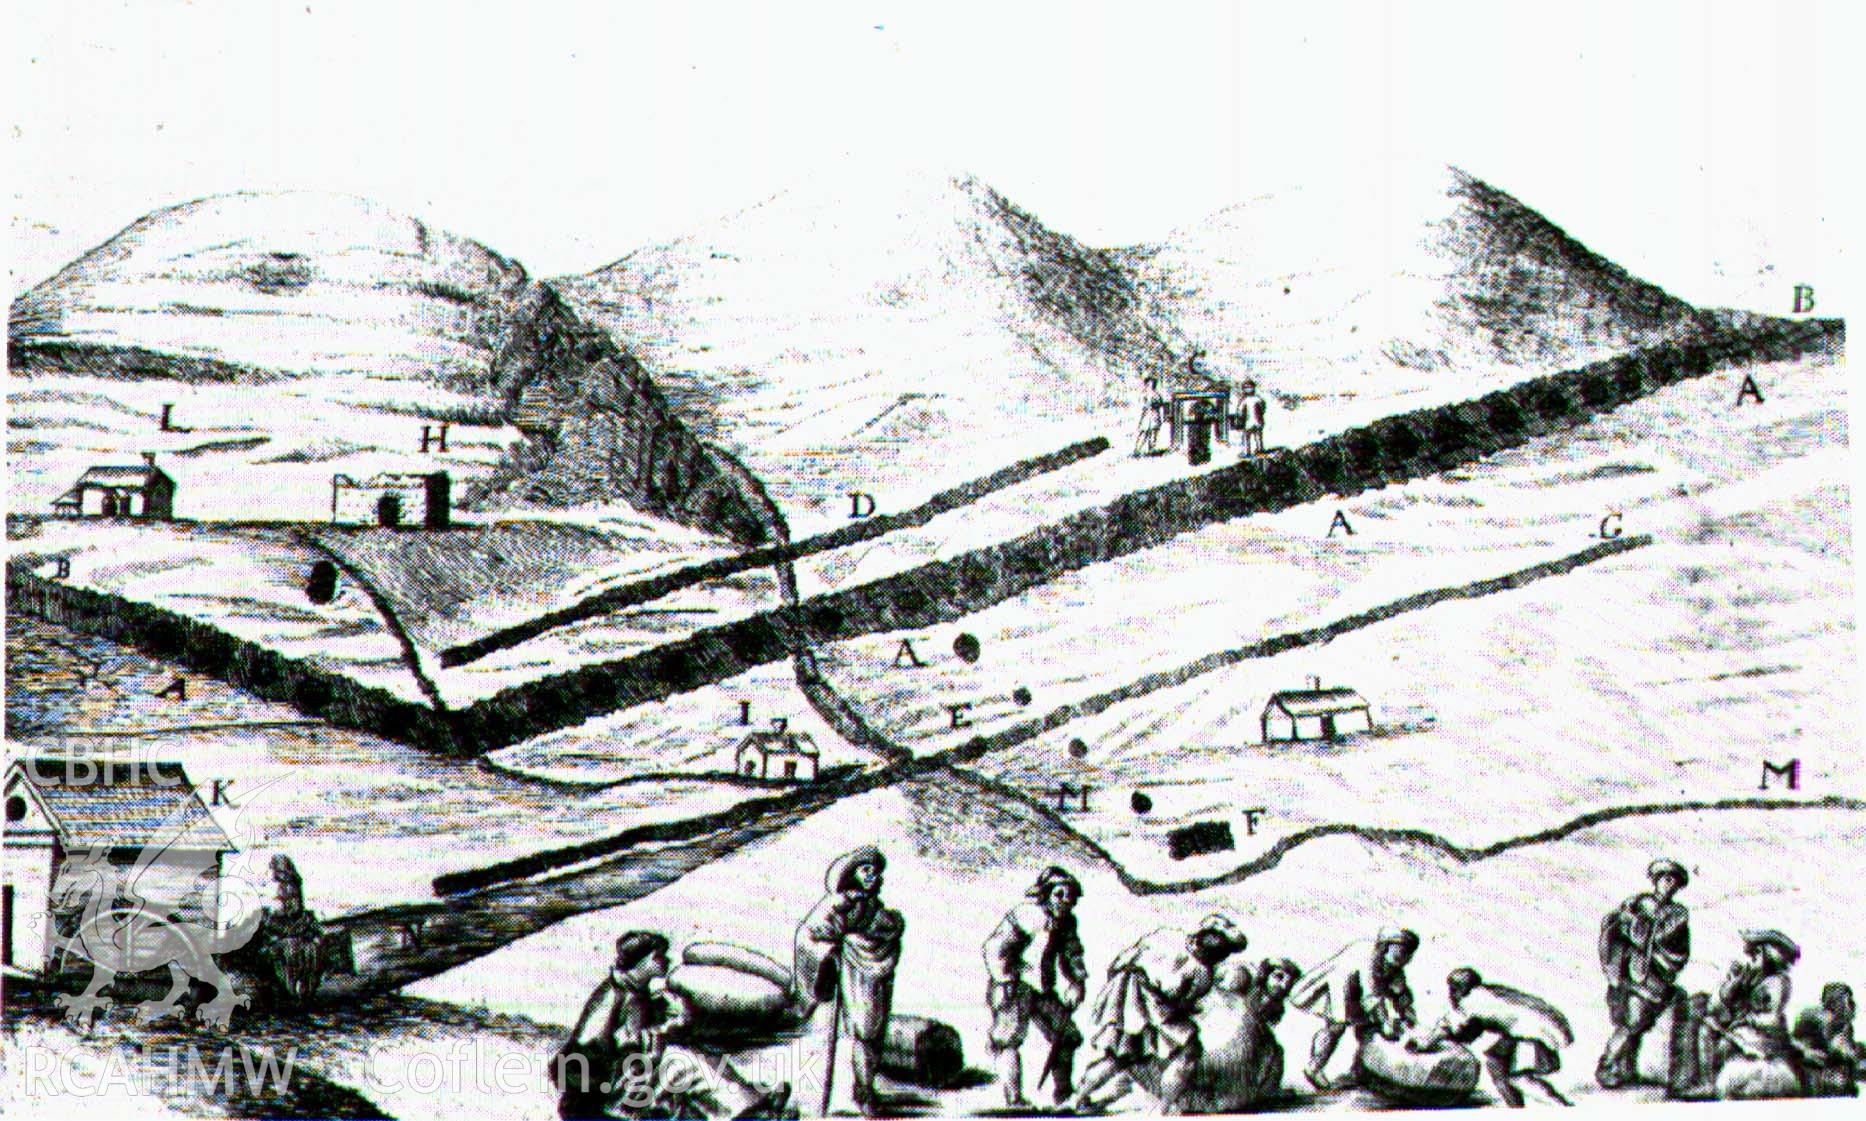 Digital image of Pettus' 1670 illustration of the great trench at Cwmsymlog - Hughes, 1990, Bick & Davies, 1994